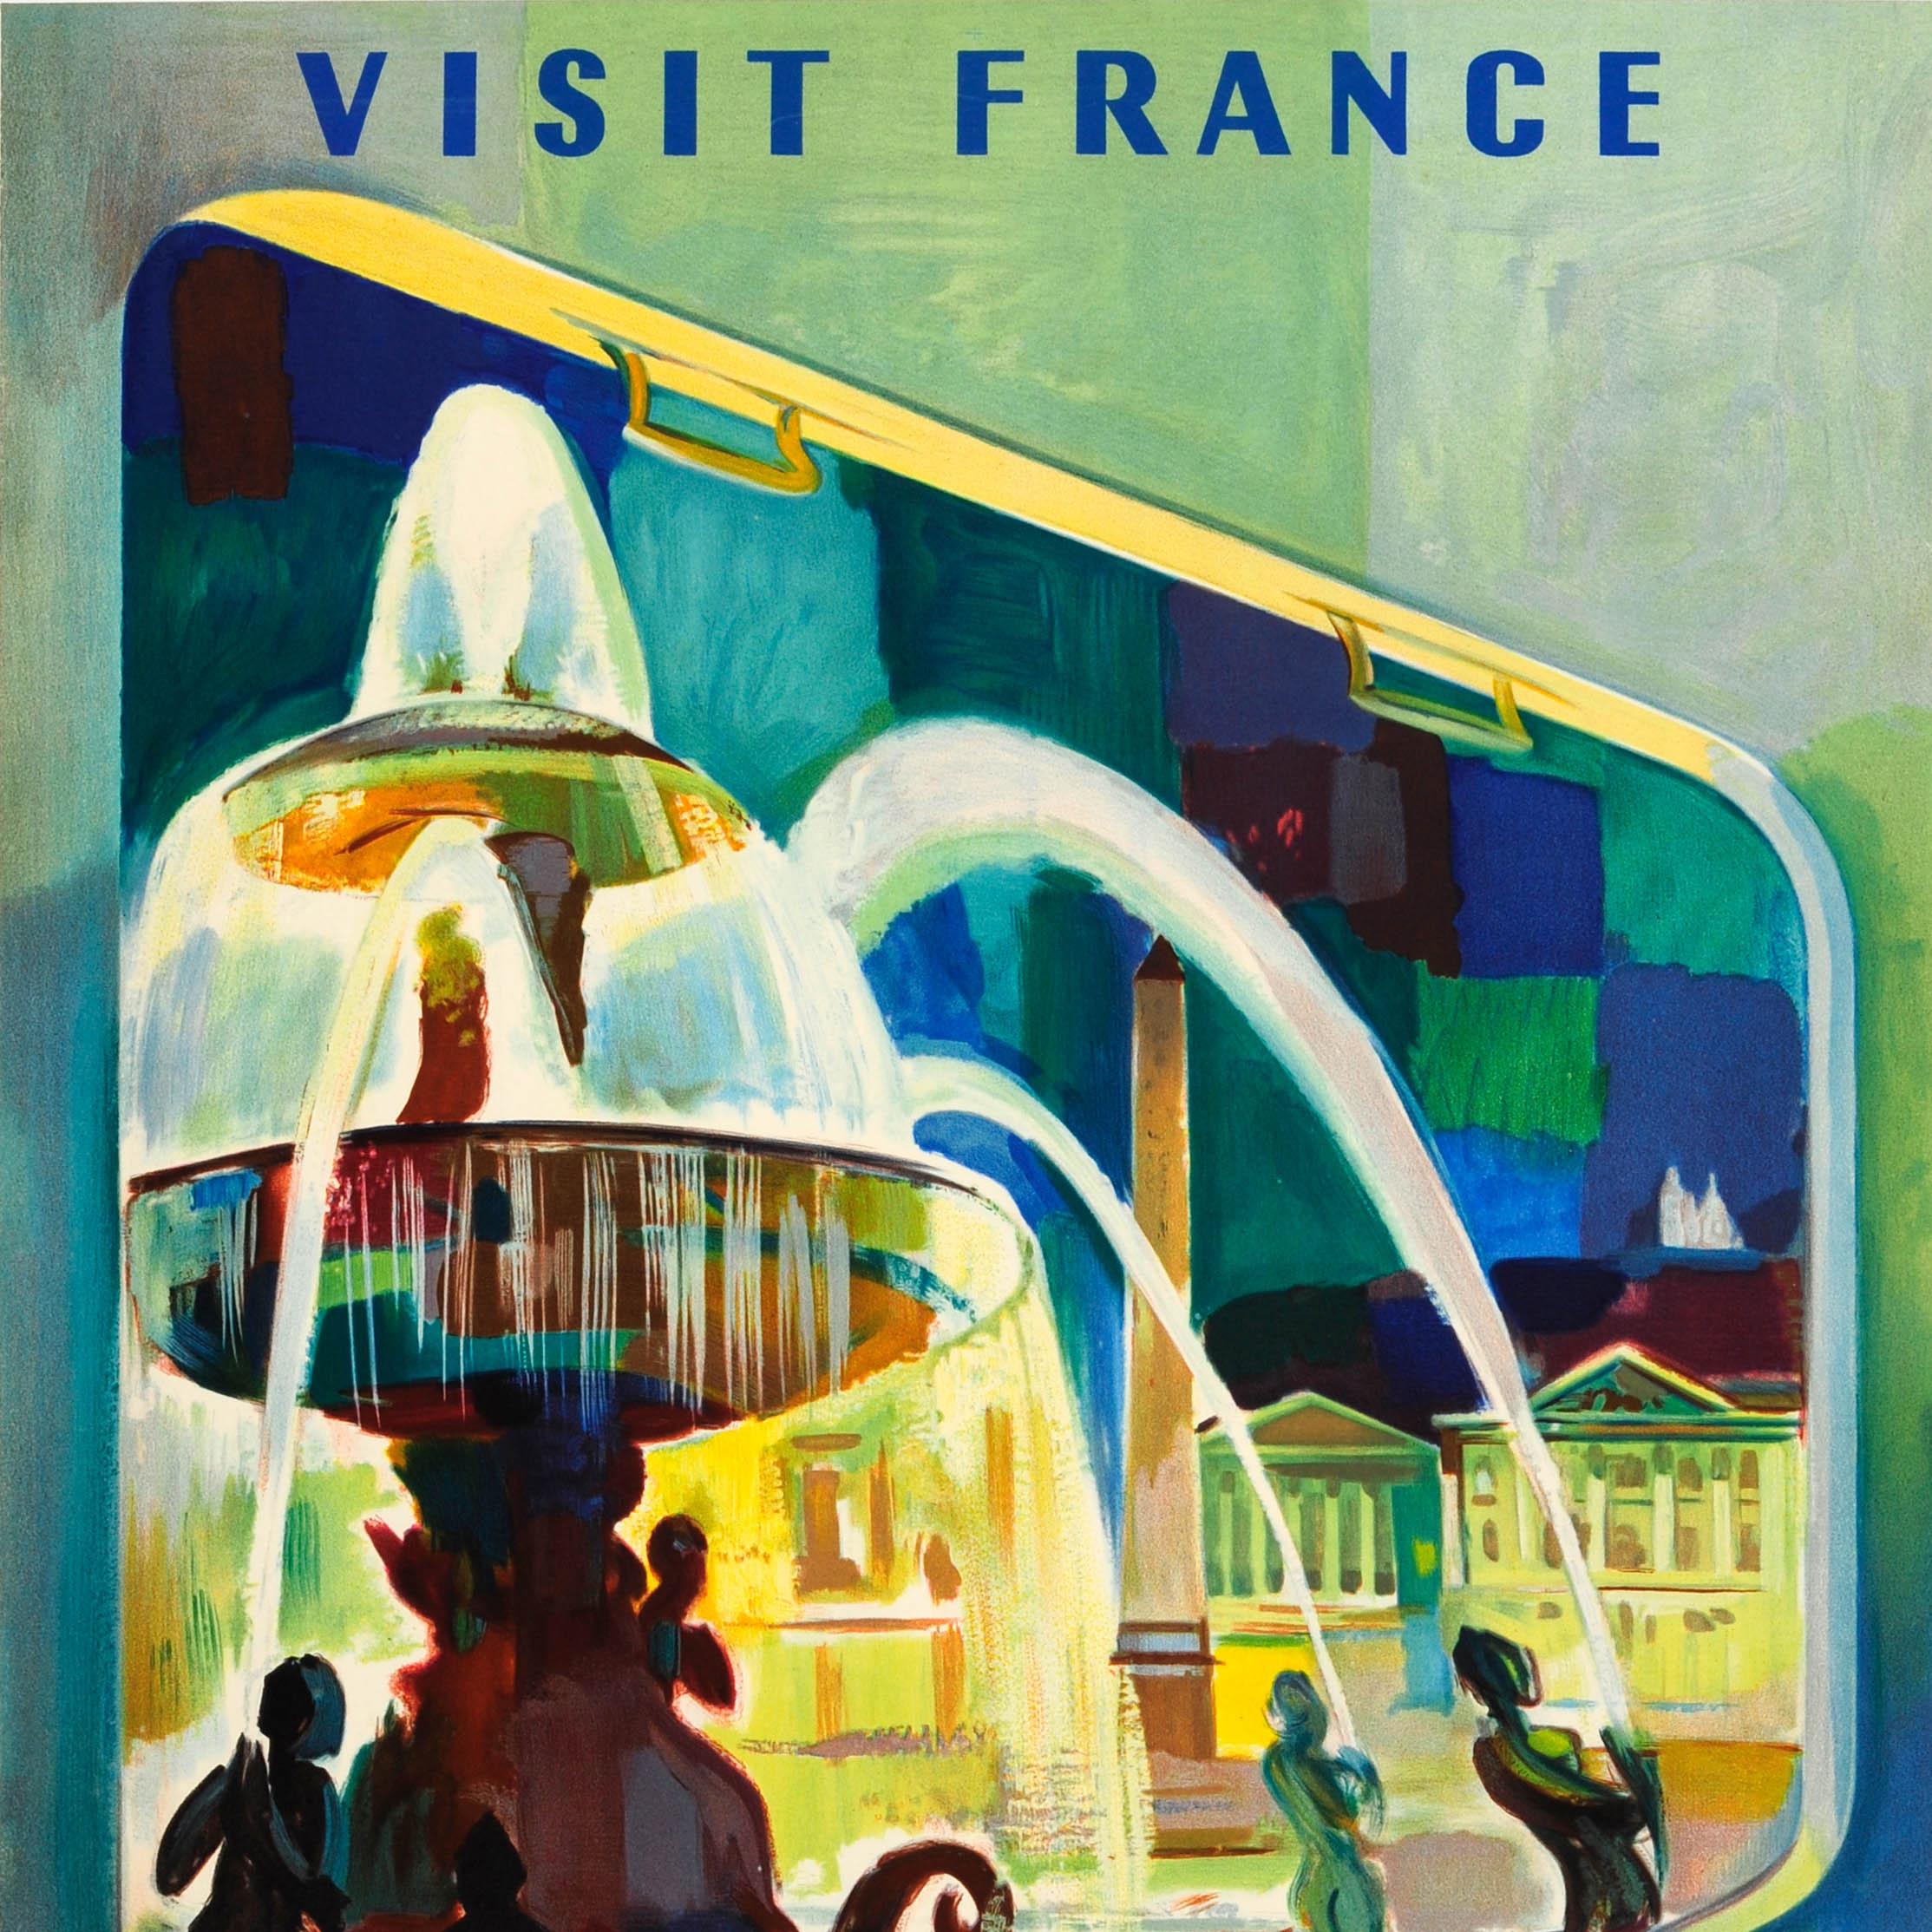 sncf poster